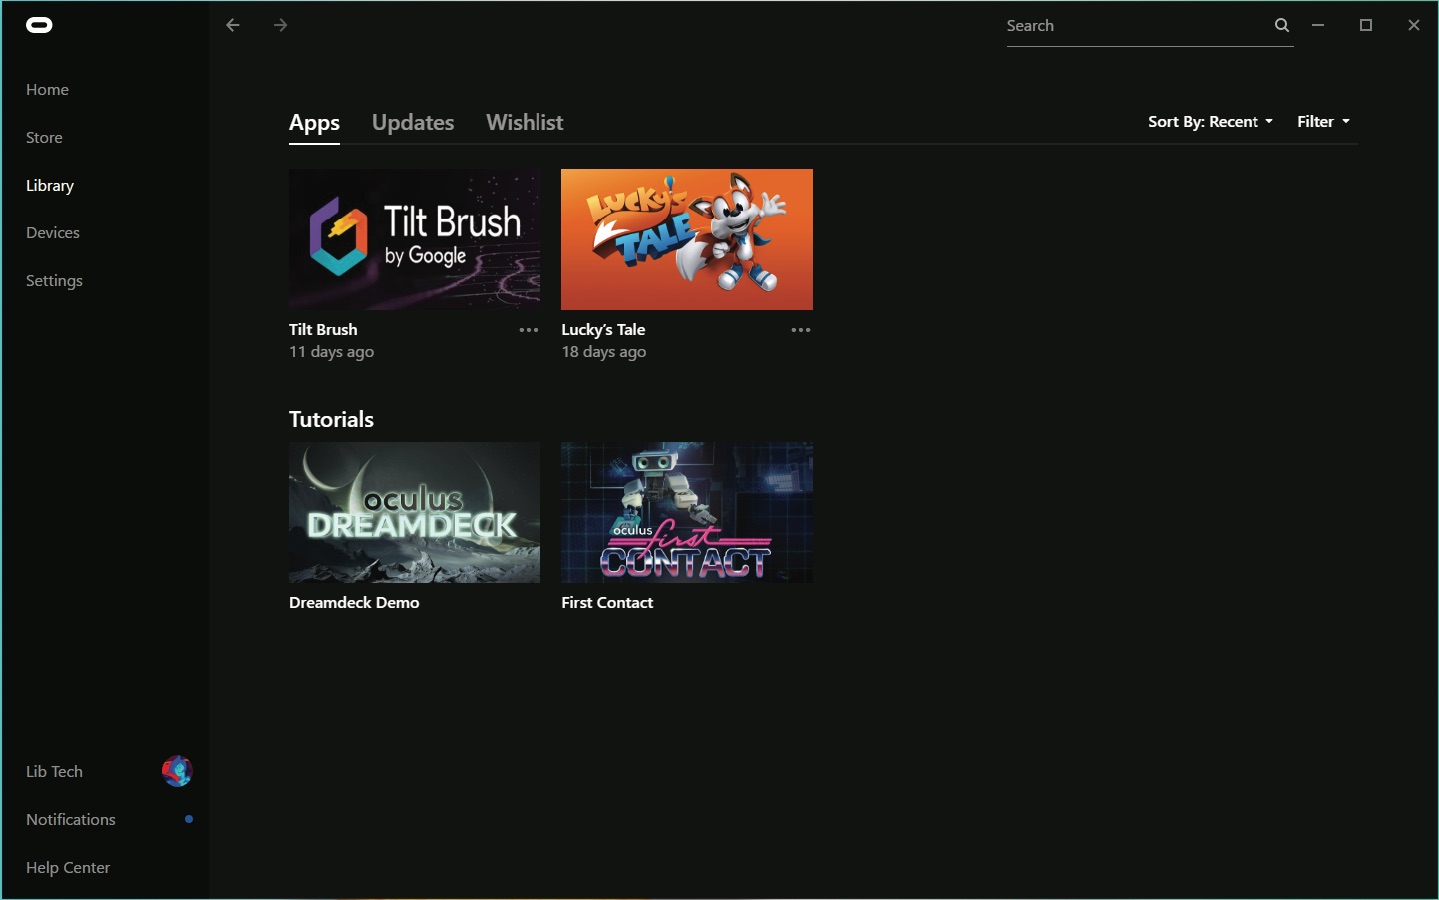 Library tab selected -showing apps such as tilt brush - lucky's tale - dreamdeck demo and first contact